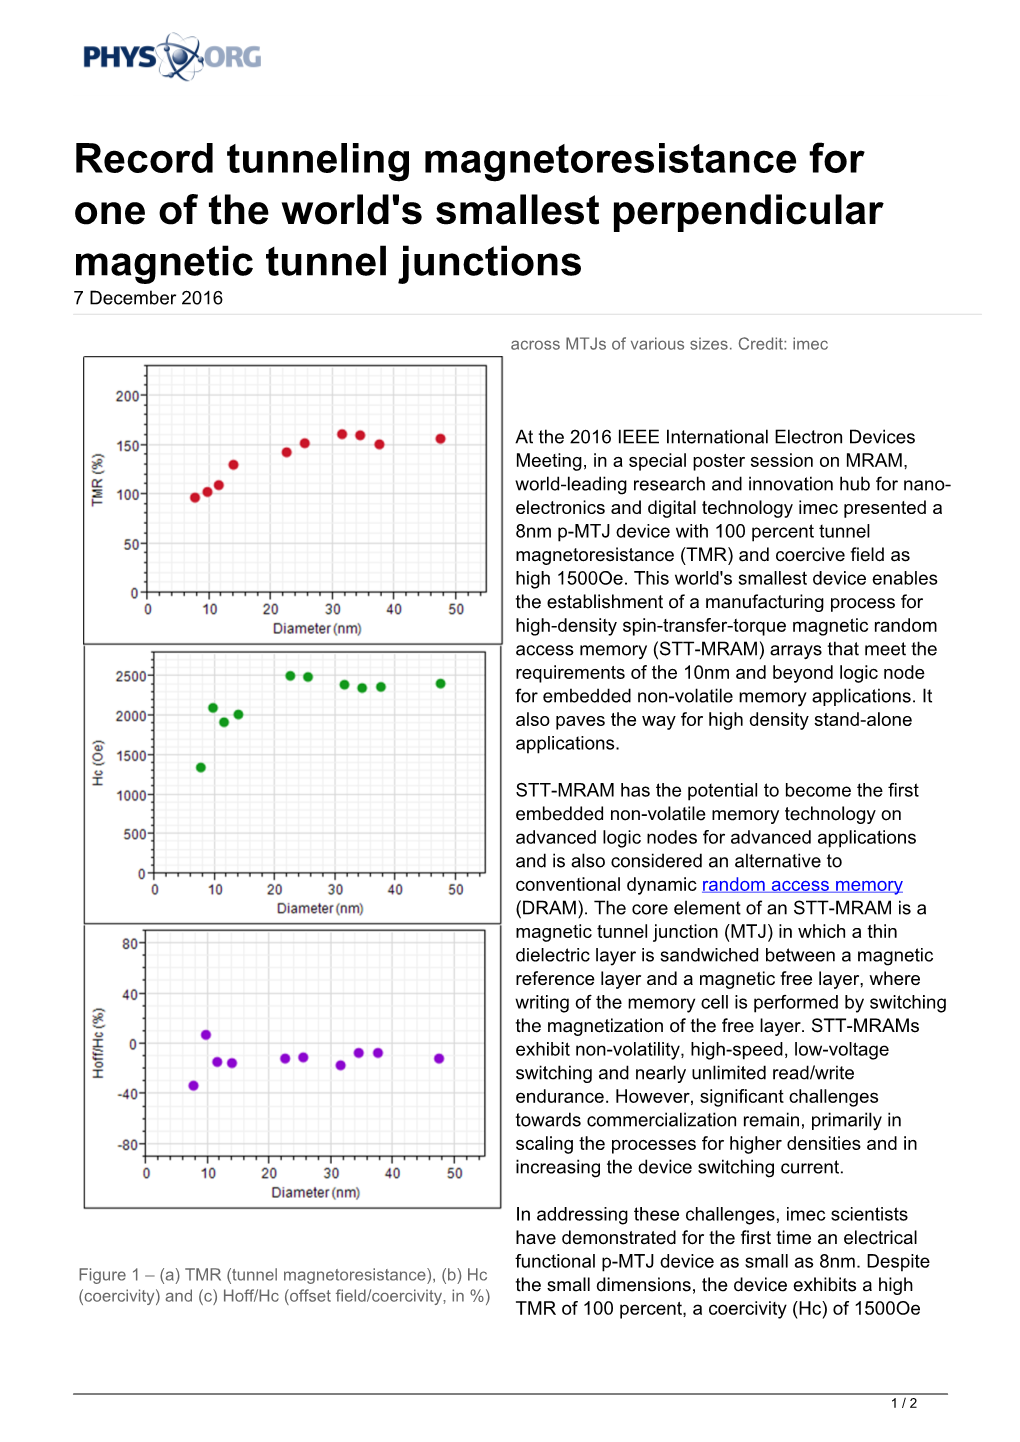 Record Tunneling Magnetoresistance for One of the World's Smallest Perpendicular Magnetic Tunnel Junctions 7 December 2016